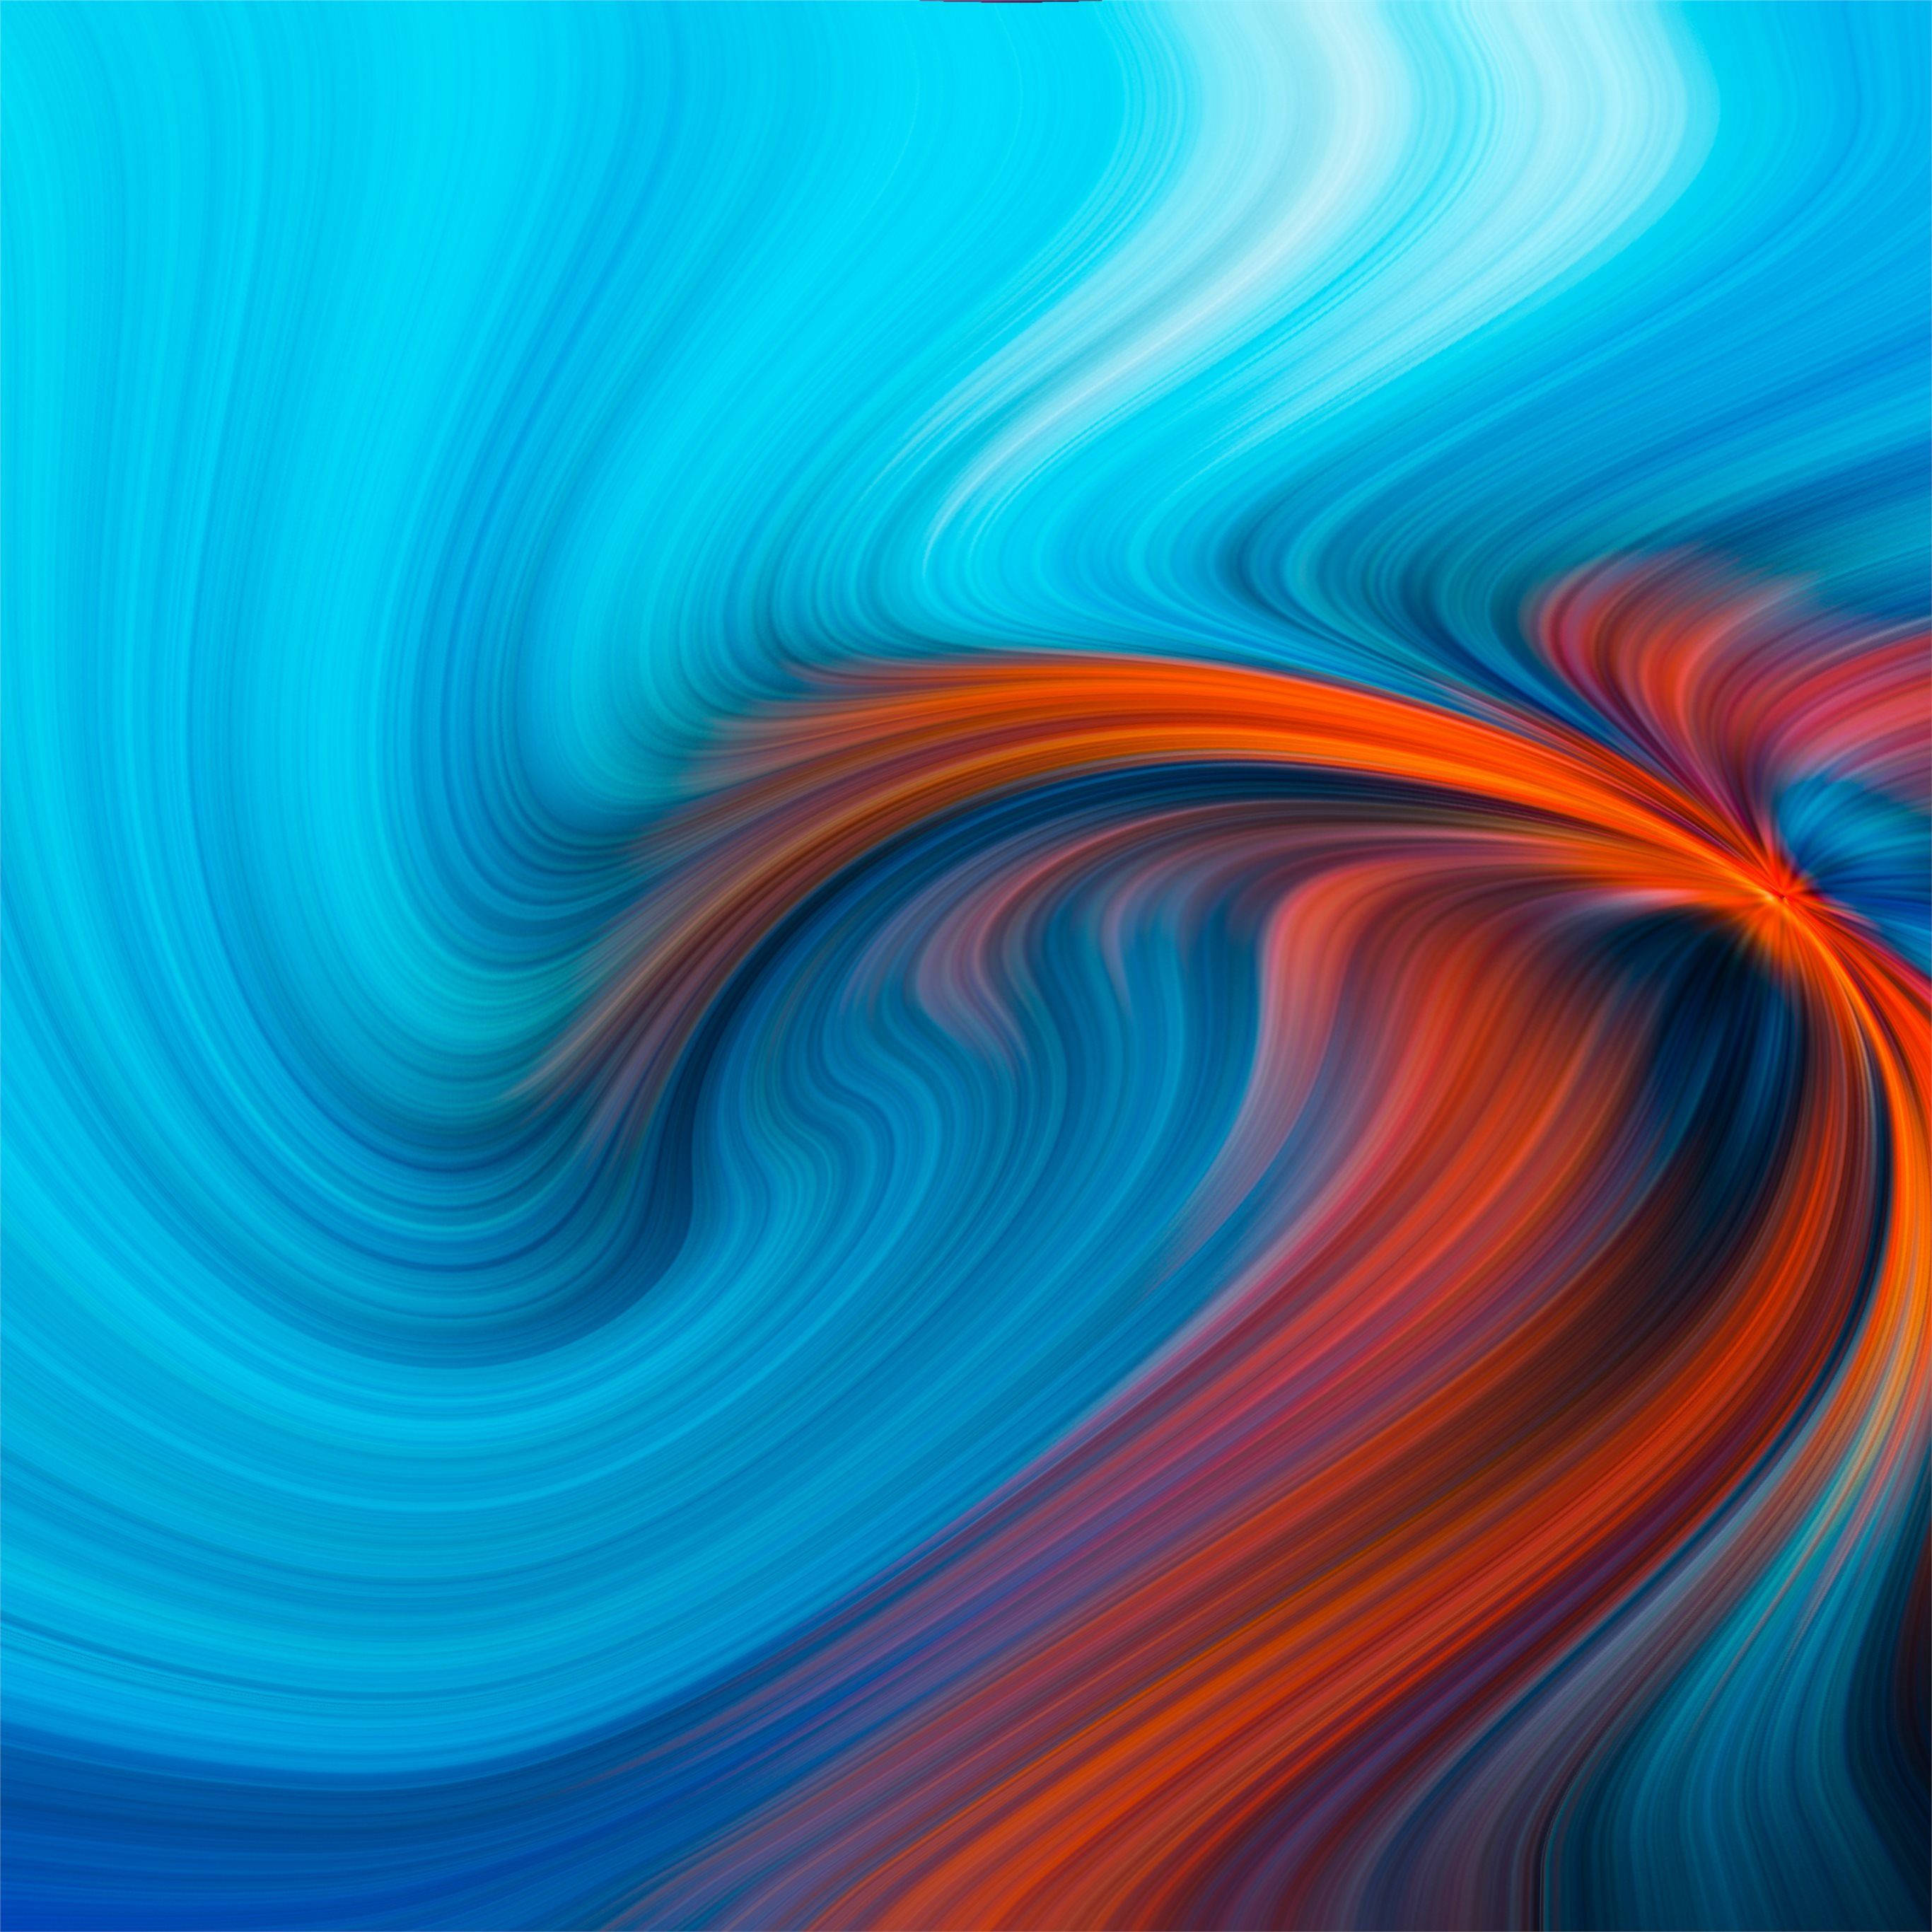 Official Ipad Theme In Abstract Illustration Background